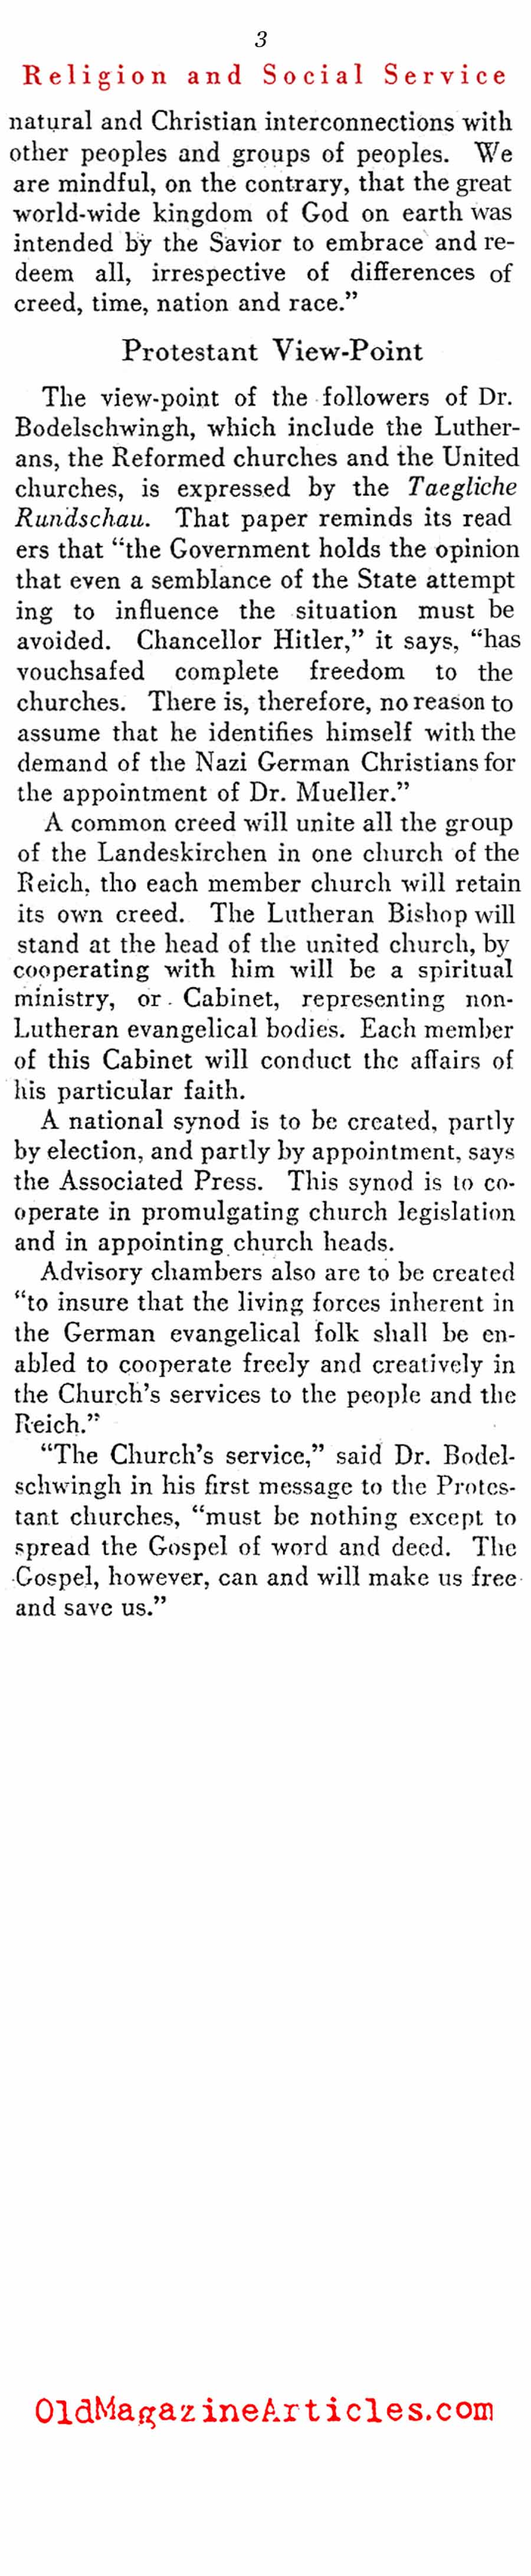 The Churches Resist (Literary Digest, 1933)